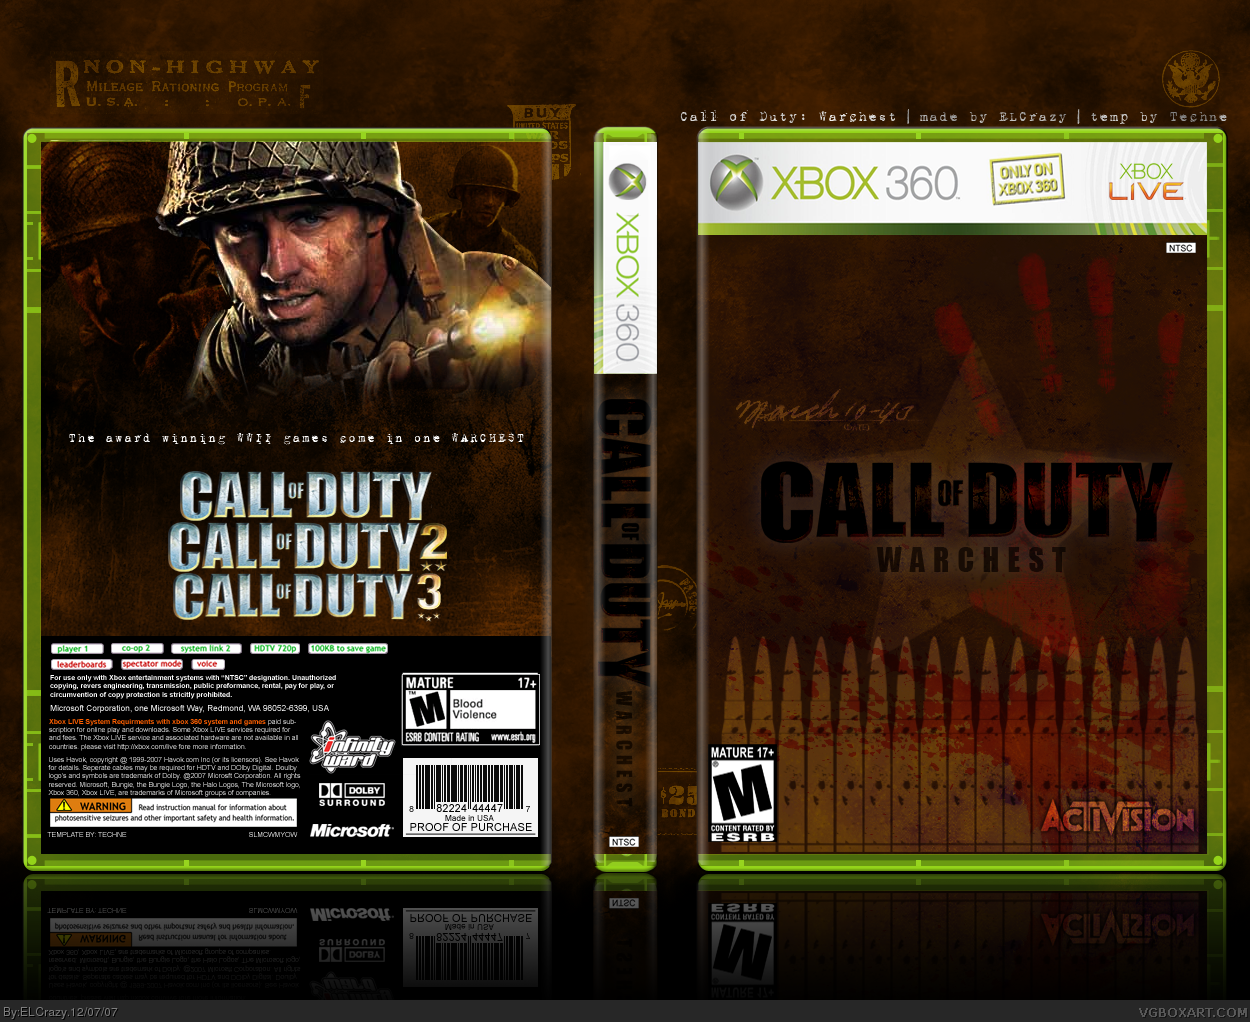 Call of Duty: Warchest box cover